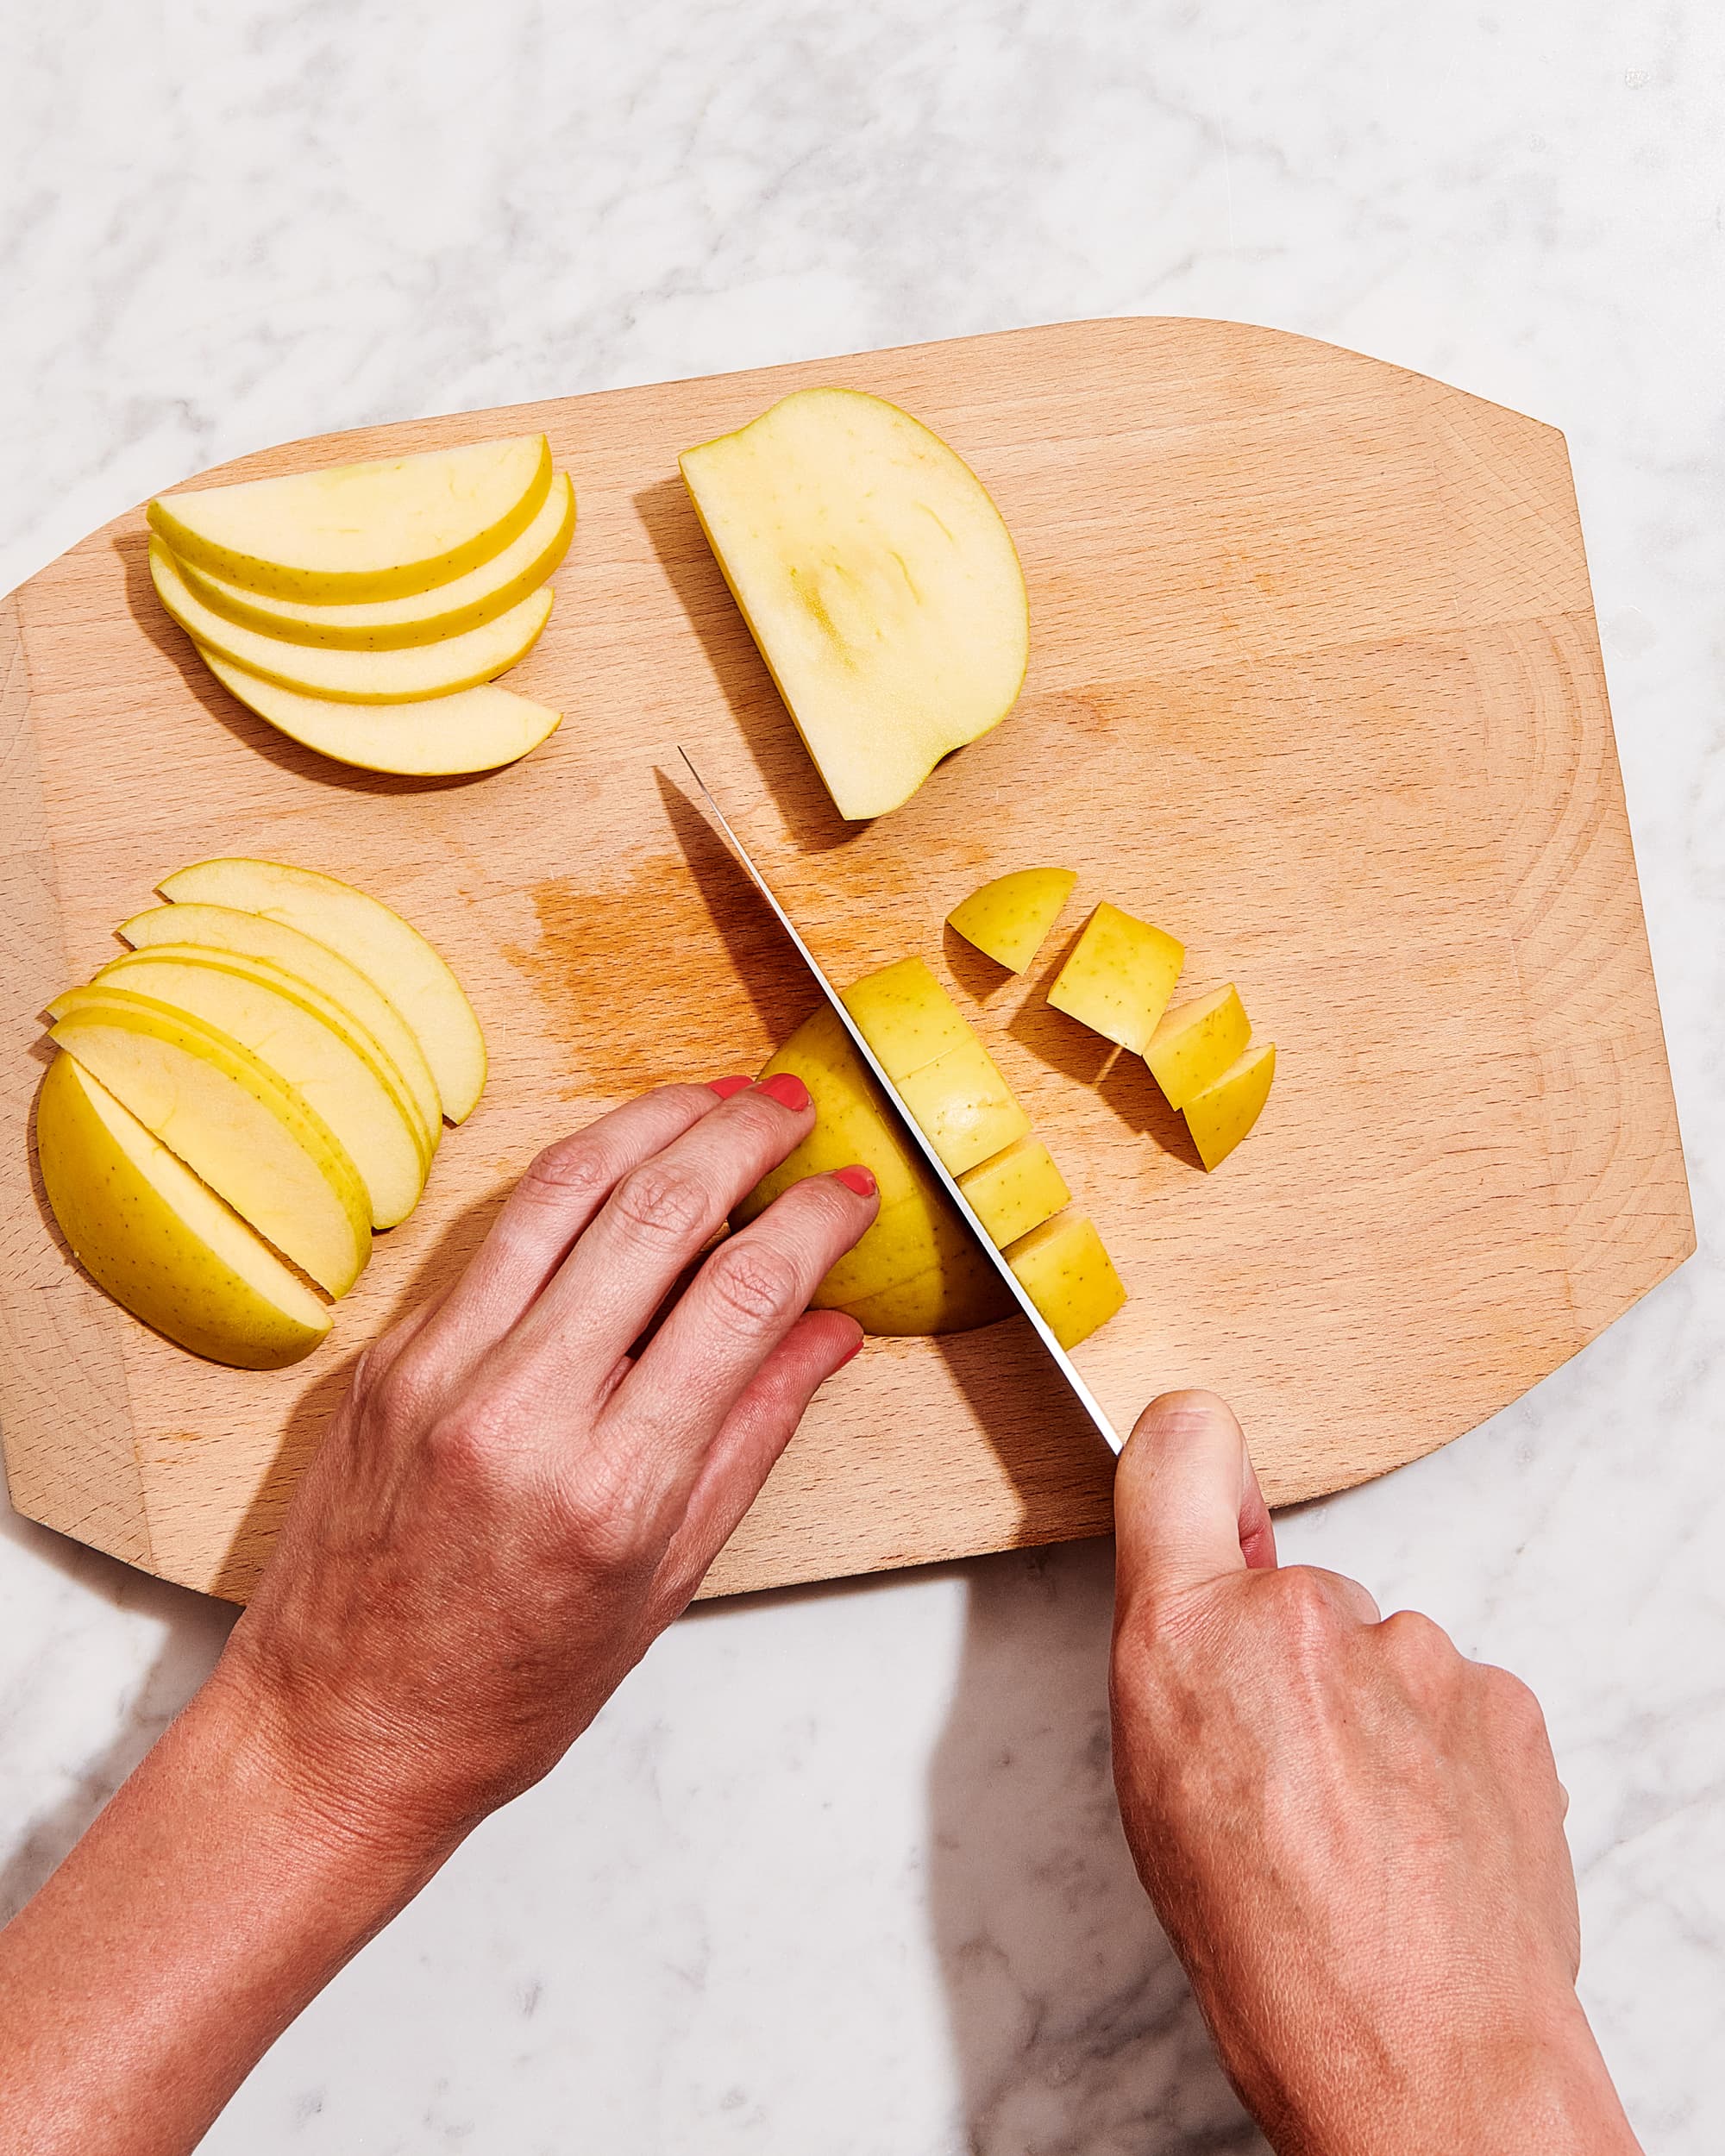 How to Cut an Apple for Baking and Snacking